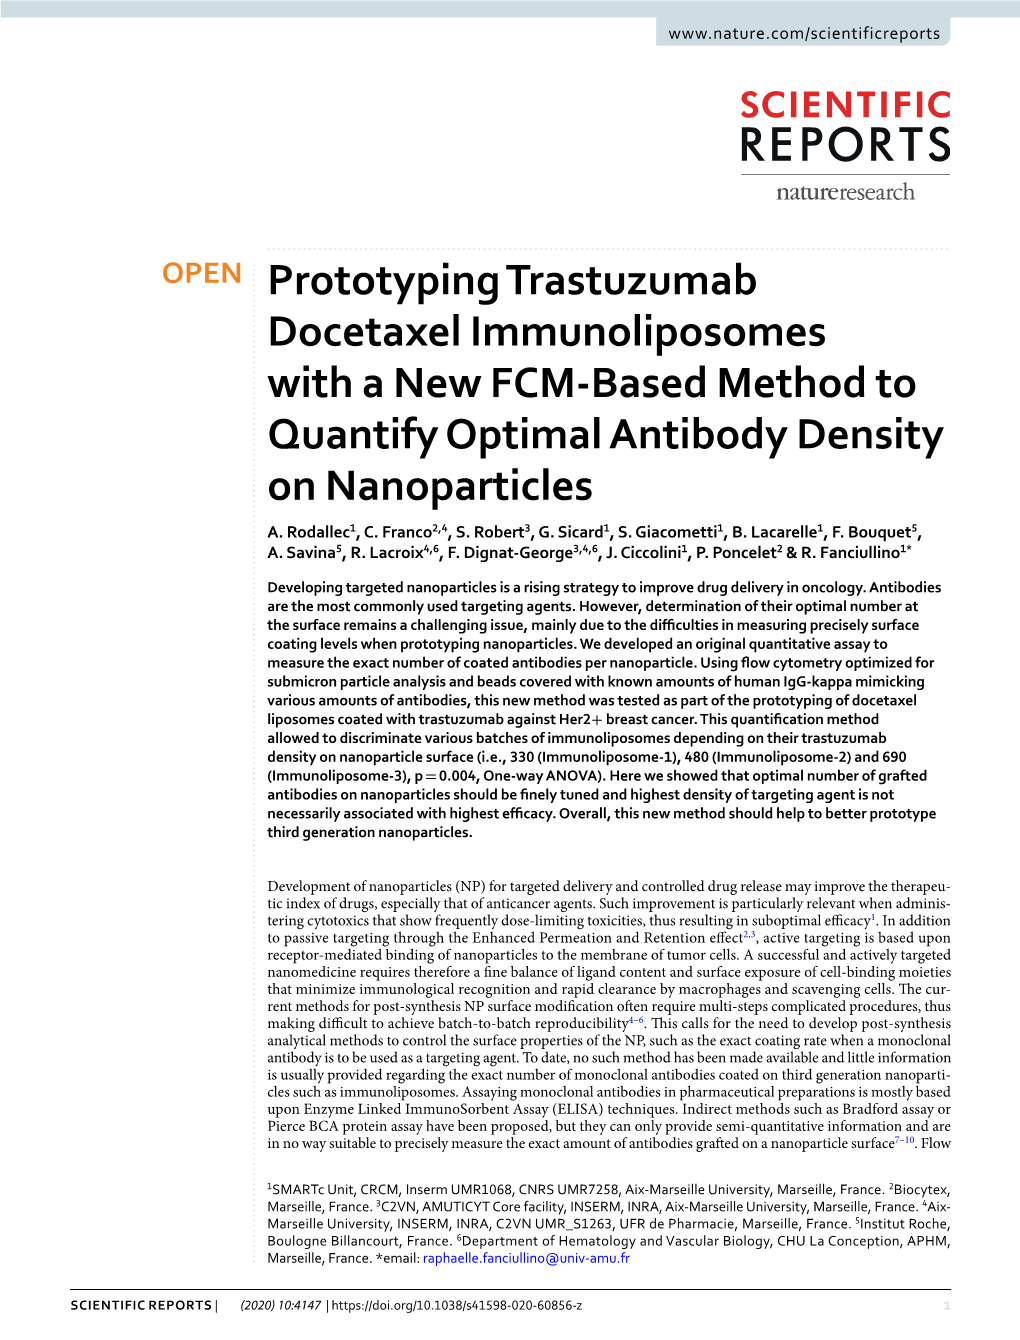 Prototyping Trastuzumab Docetaxel Immunoliposomes with a New FCM-Based Method to Quantify Optimal Antibody Density on Nanoparticles A